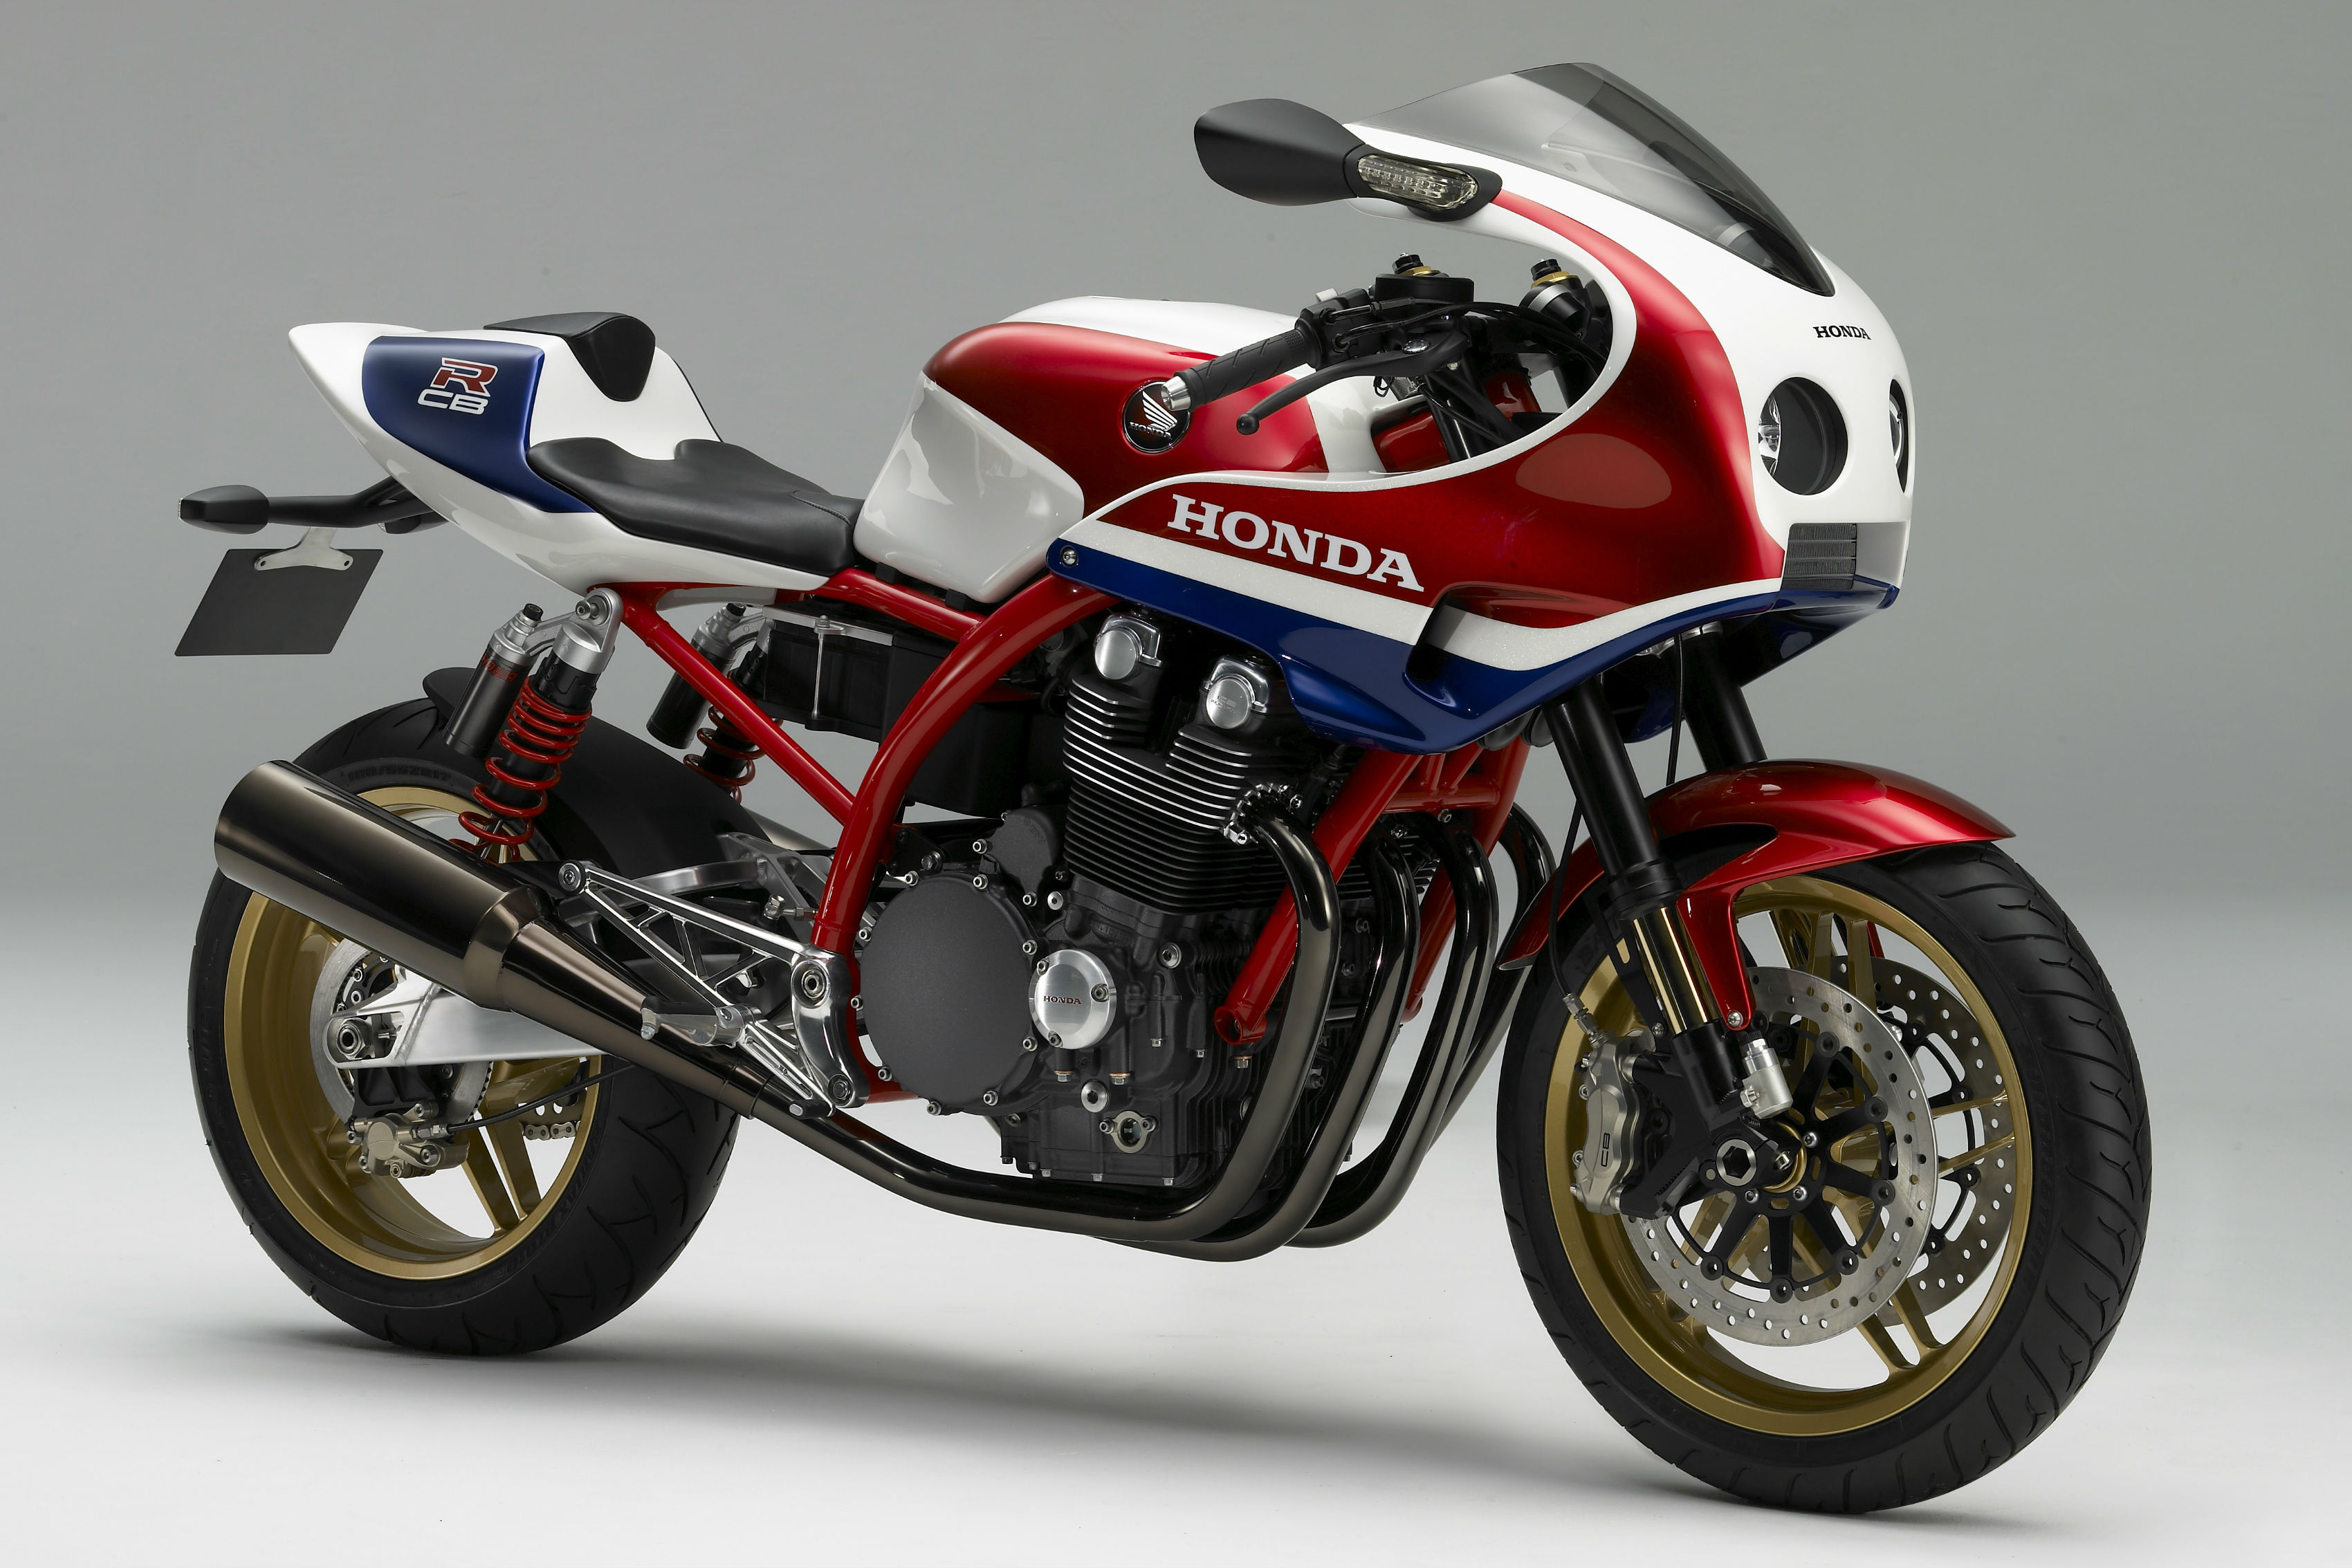 New Honda CB1100 to be previewed